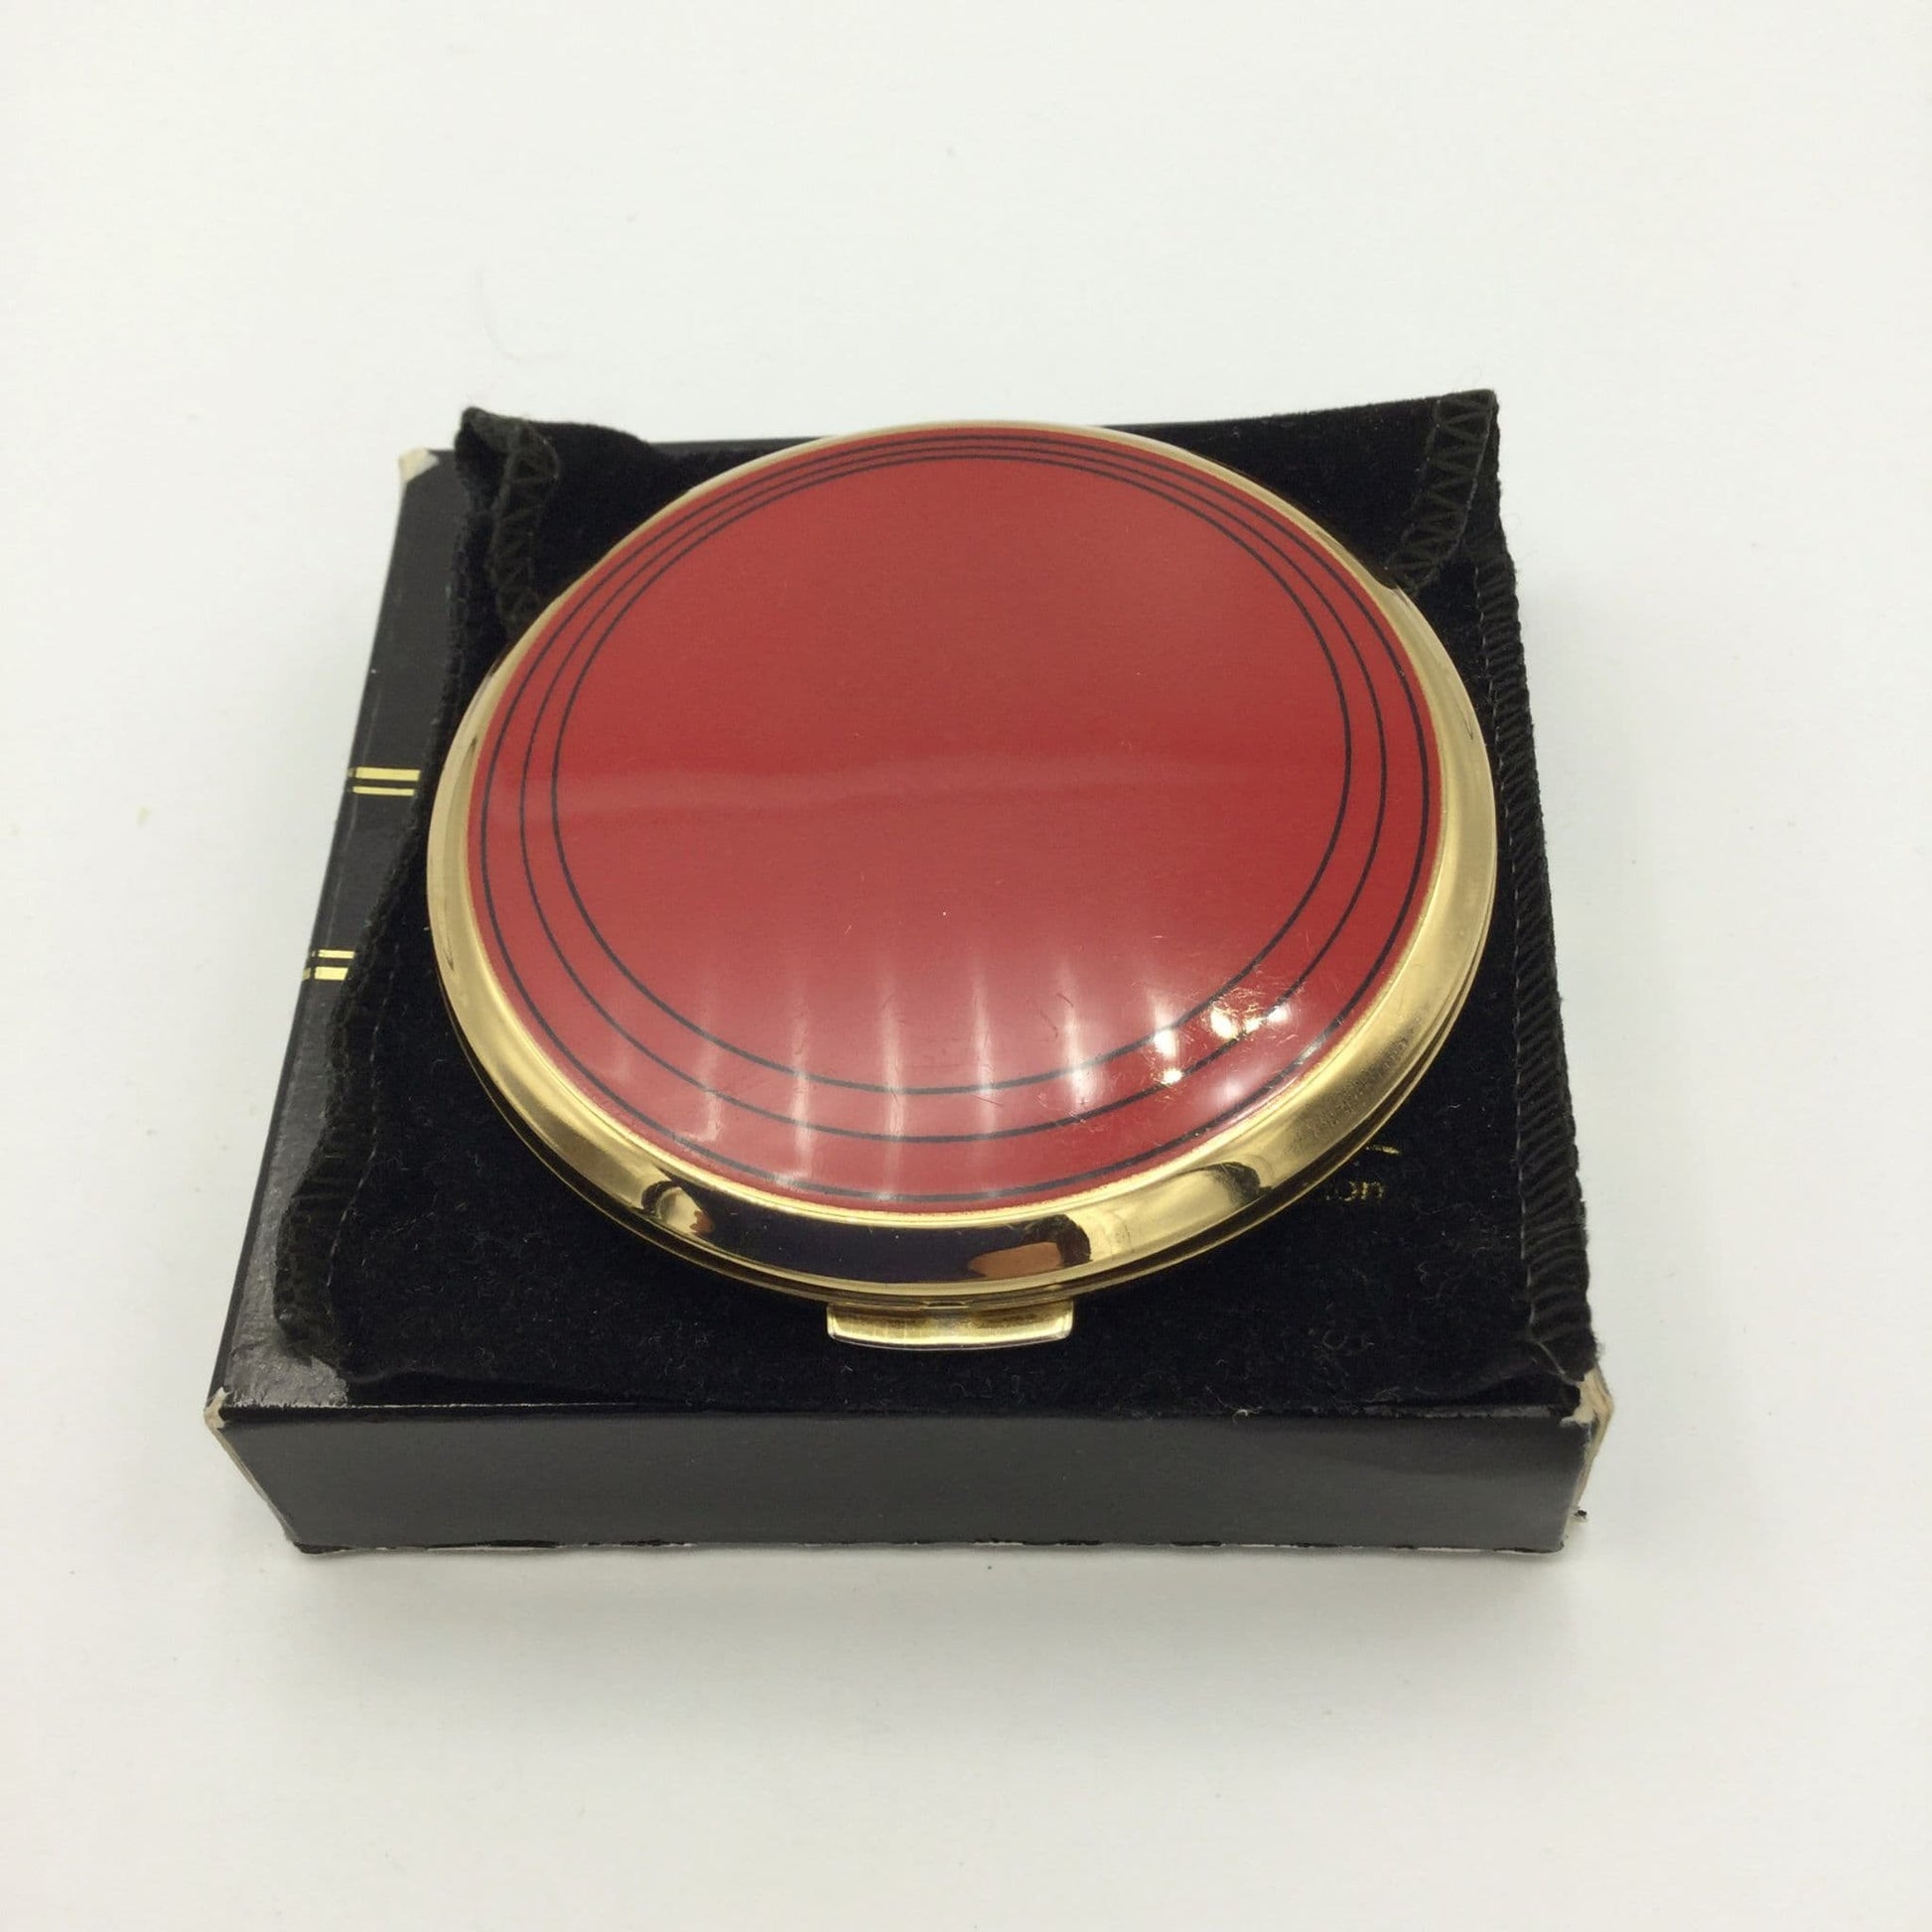 Bright red enamel on a Stratton mirror compact sitting on a  pouch and box